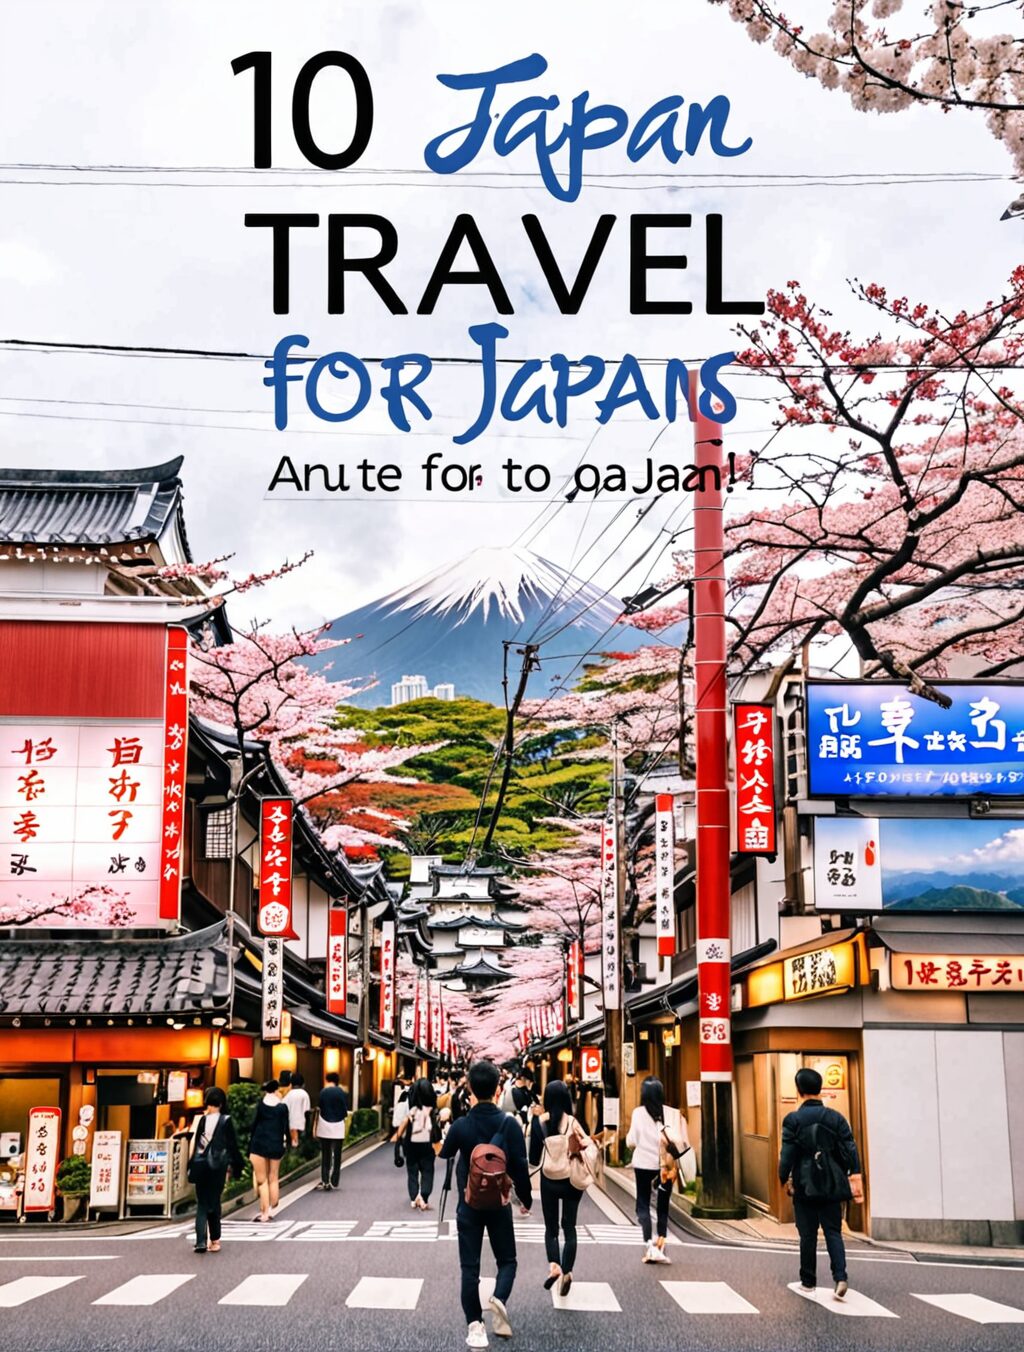 how much should i save for a trip to japan reddit